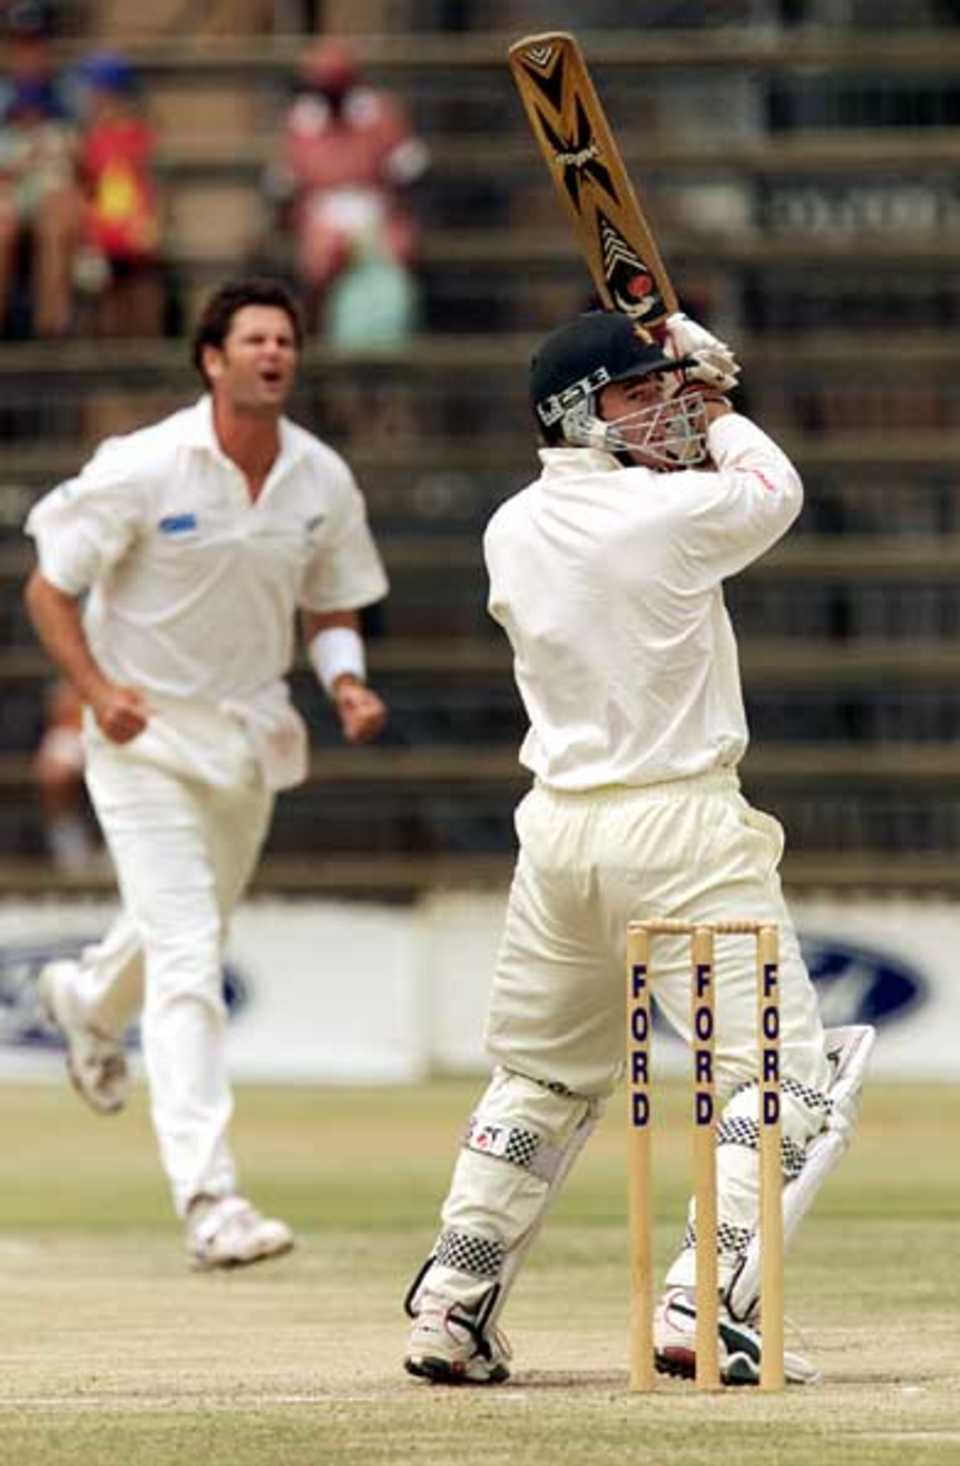 Whittall cuts during his 188*, 5th day, 2nd Test, Zimbabwe v New Zealand, Sep 23 2000